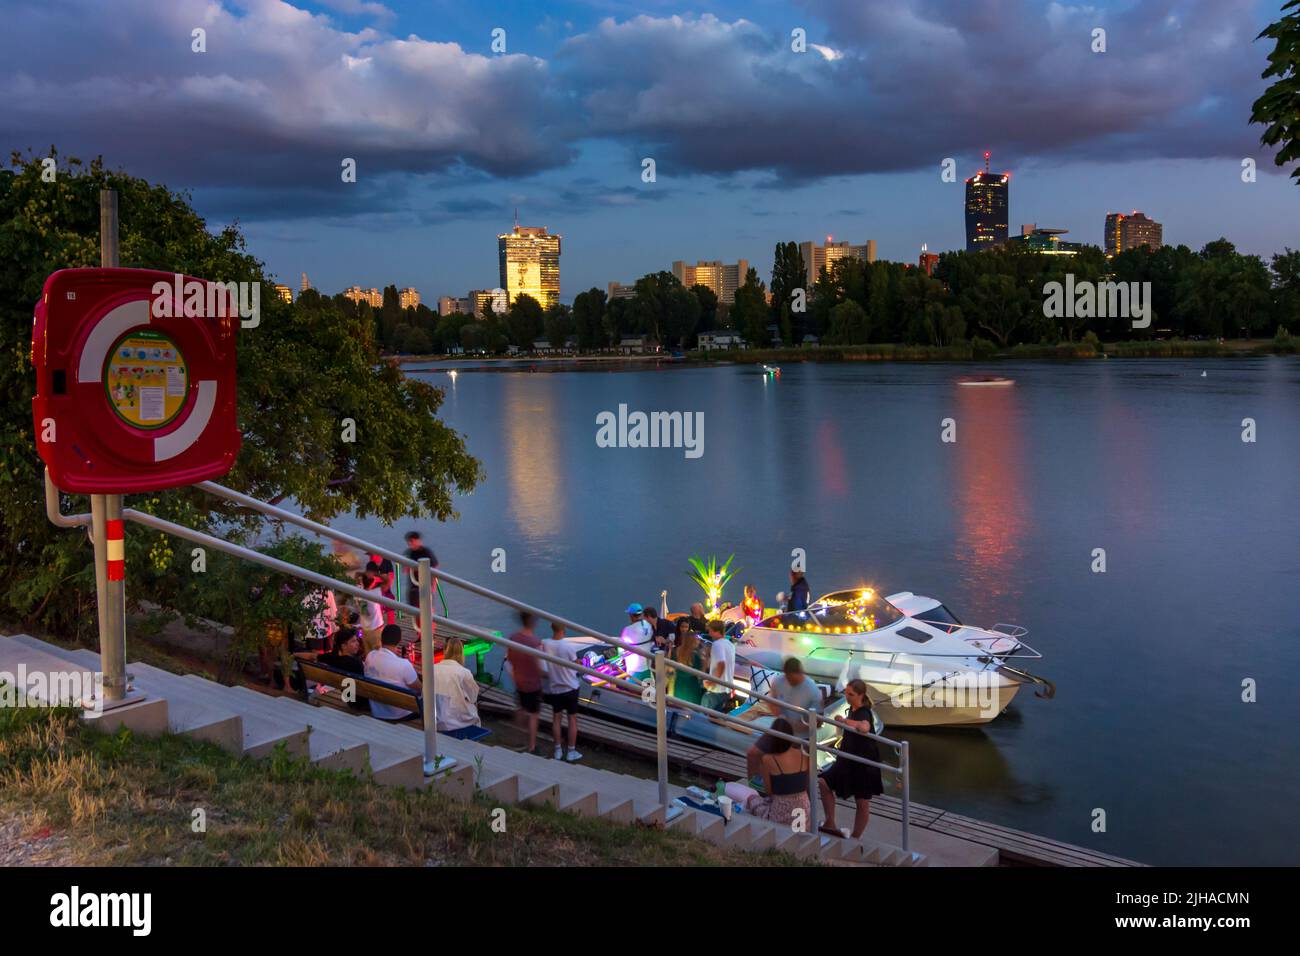 Wien, Vienna: oxbow lake Alte Donau (Old Danube), sunset, privat party on boats, IZD Tower, DC Tower 1 in 22. Donaustadt, Wien, Austria Stock Photo